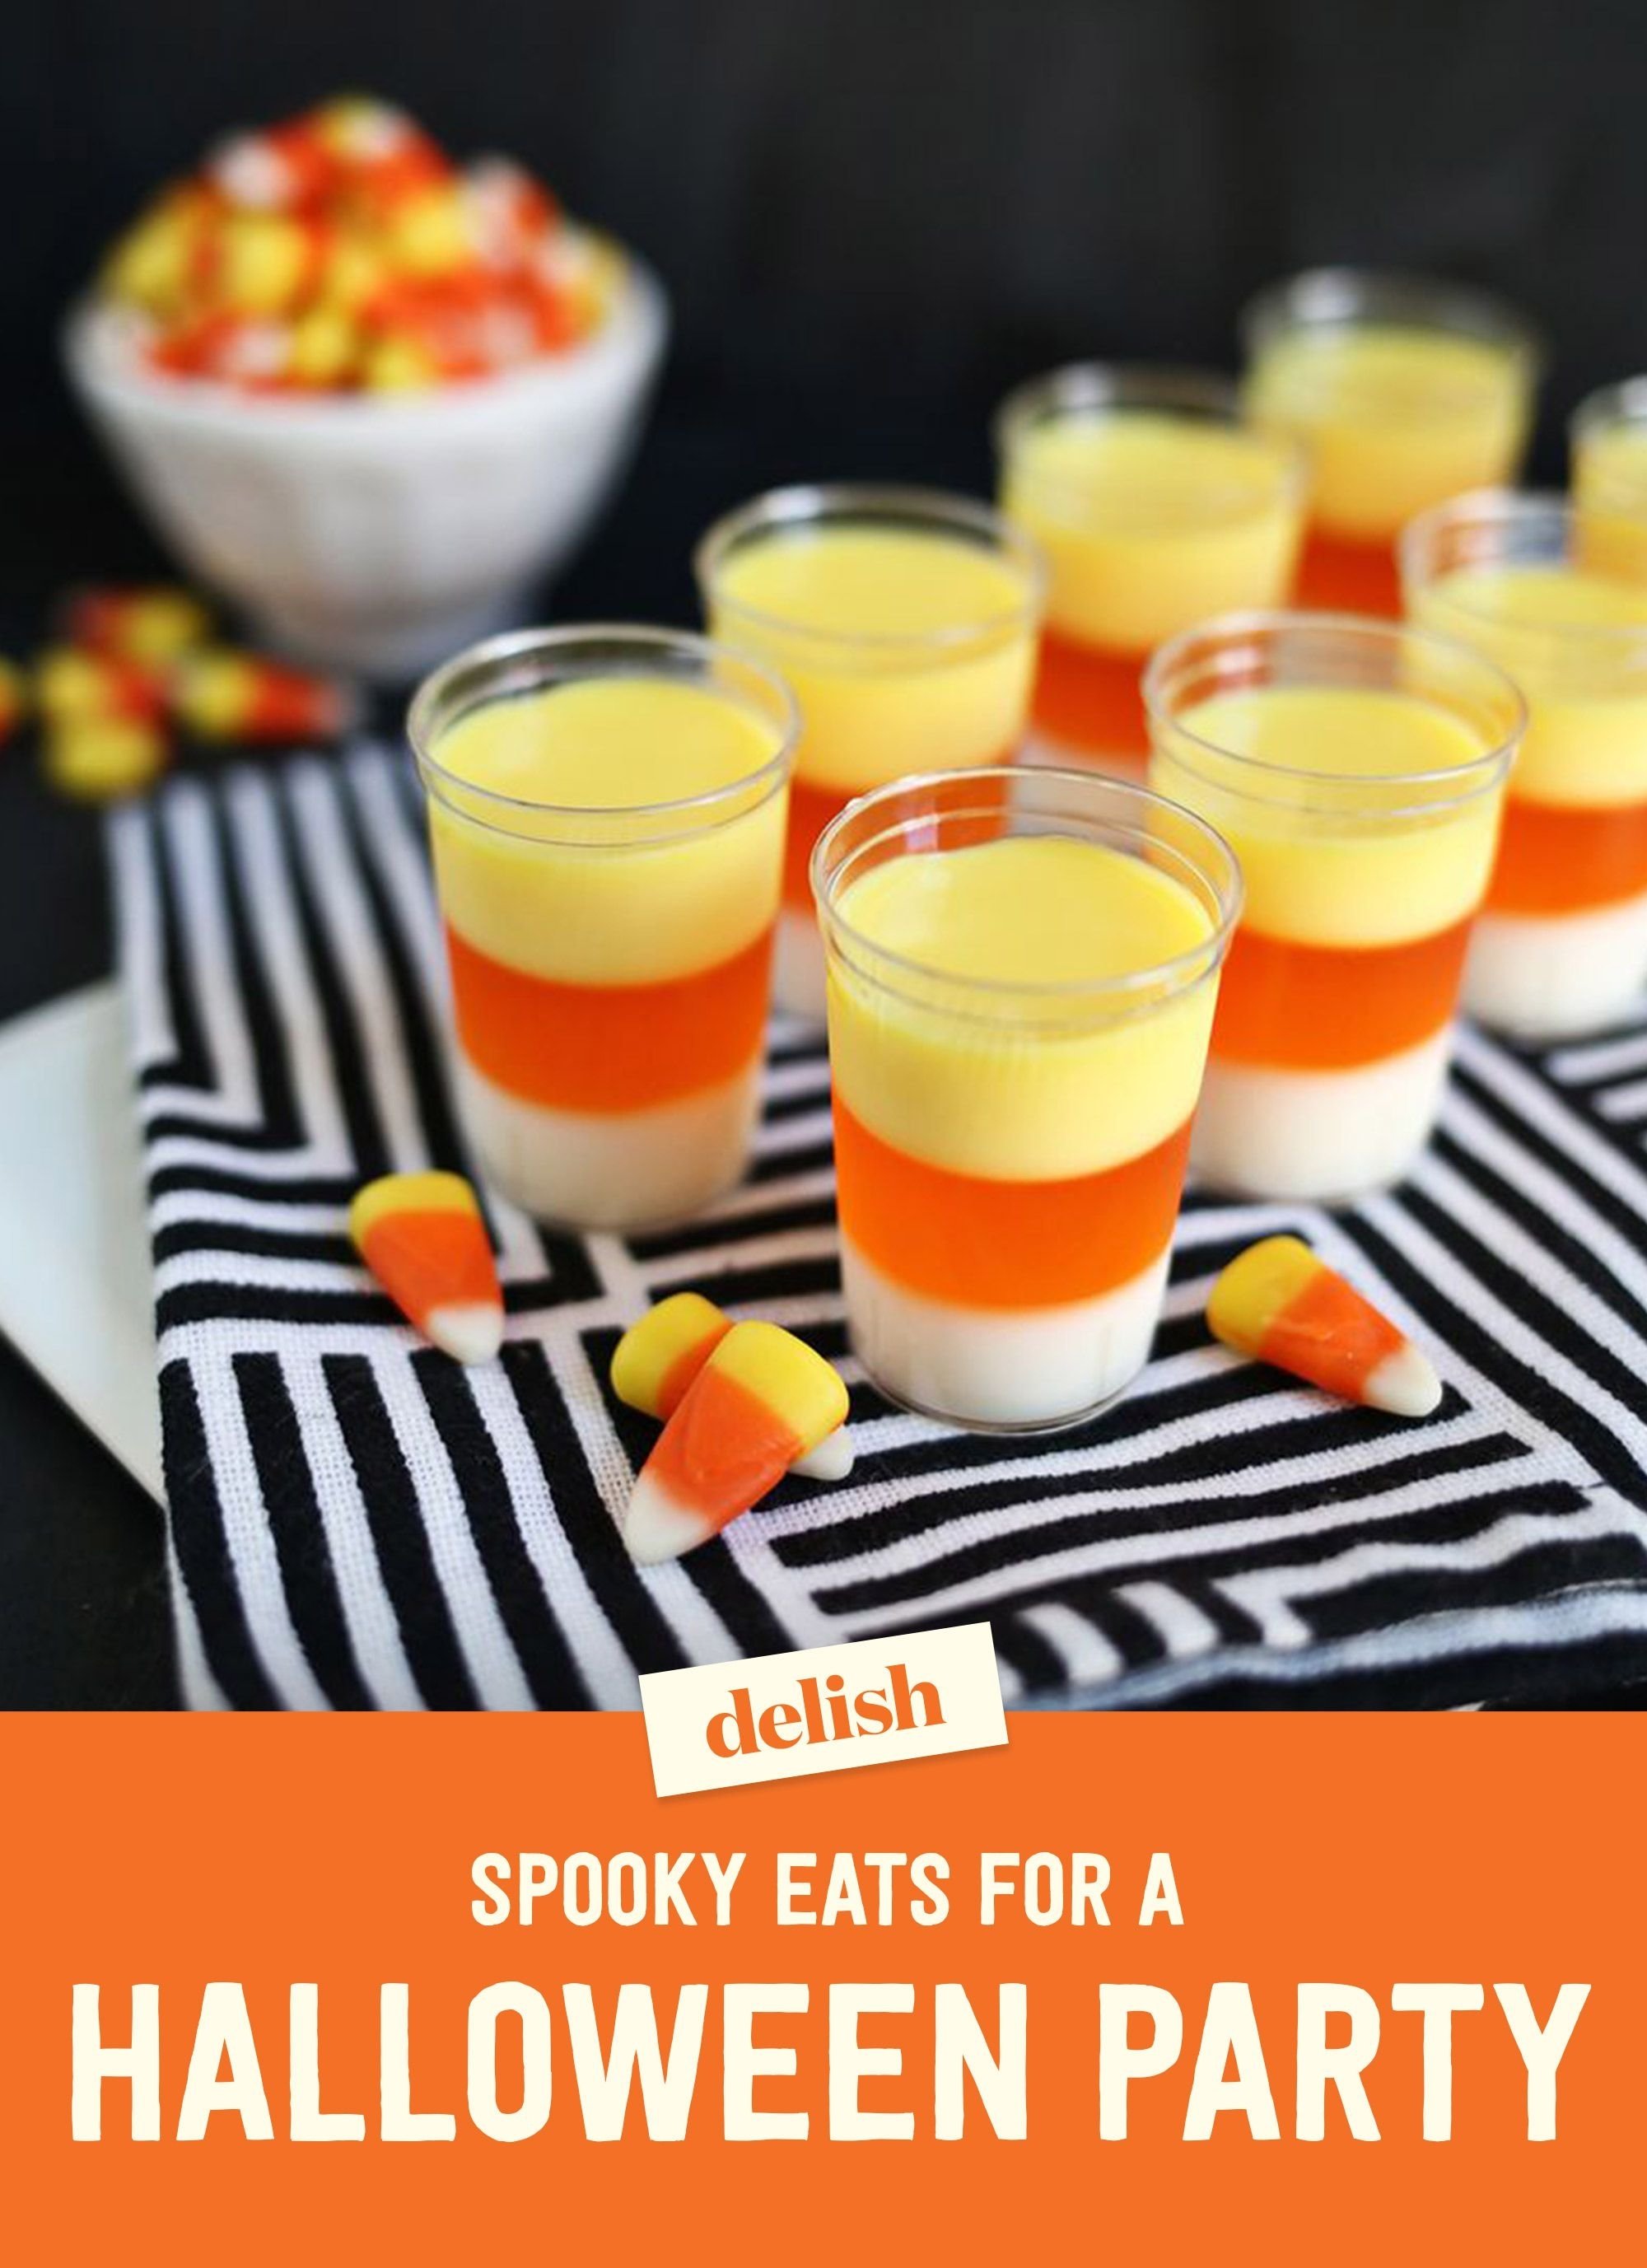 10 Most Popular Halloween Birthday Party Food Ideas 40 adult halloween party ideas halloween food for adults delish 12 2022